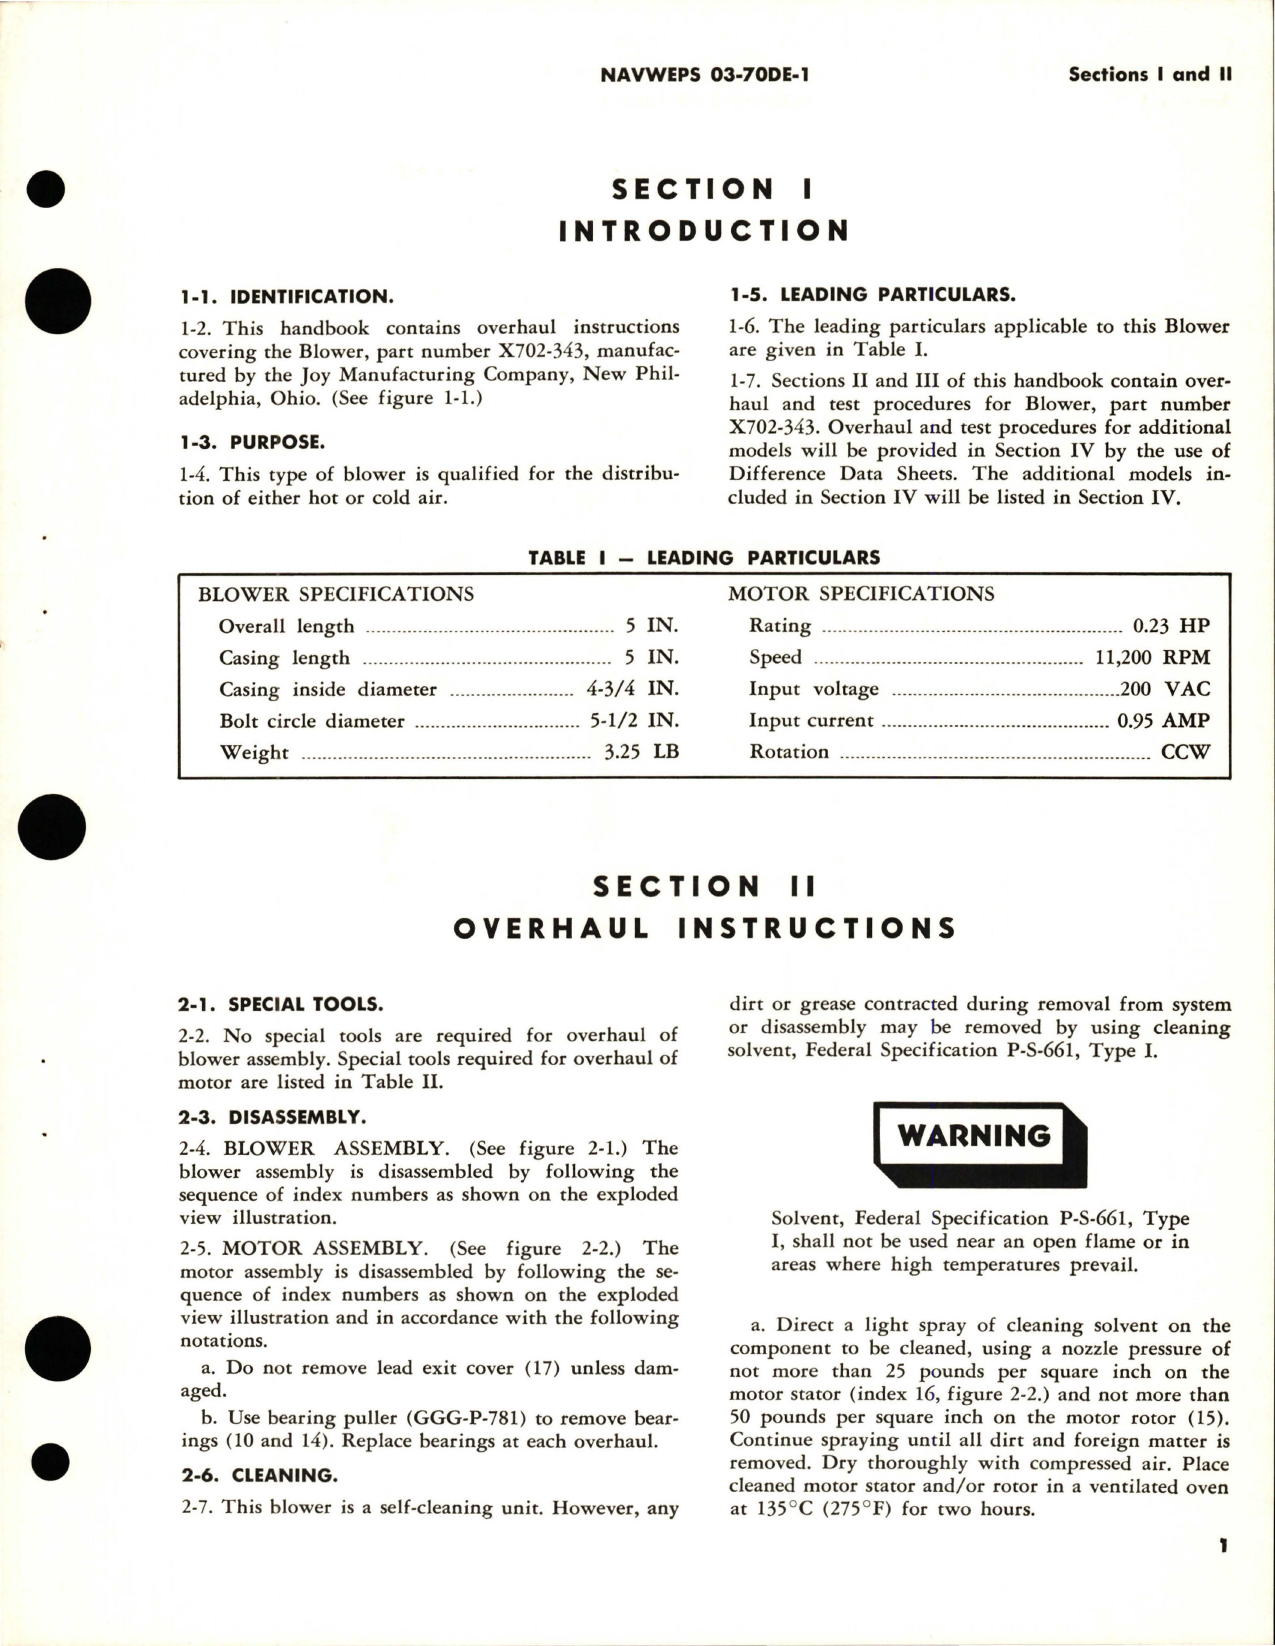 Sample page 5 from AirCorps Library document: Overhaul Instructions for Blower - X702-343 